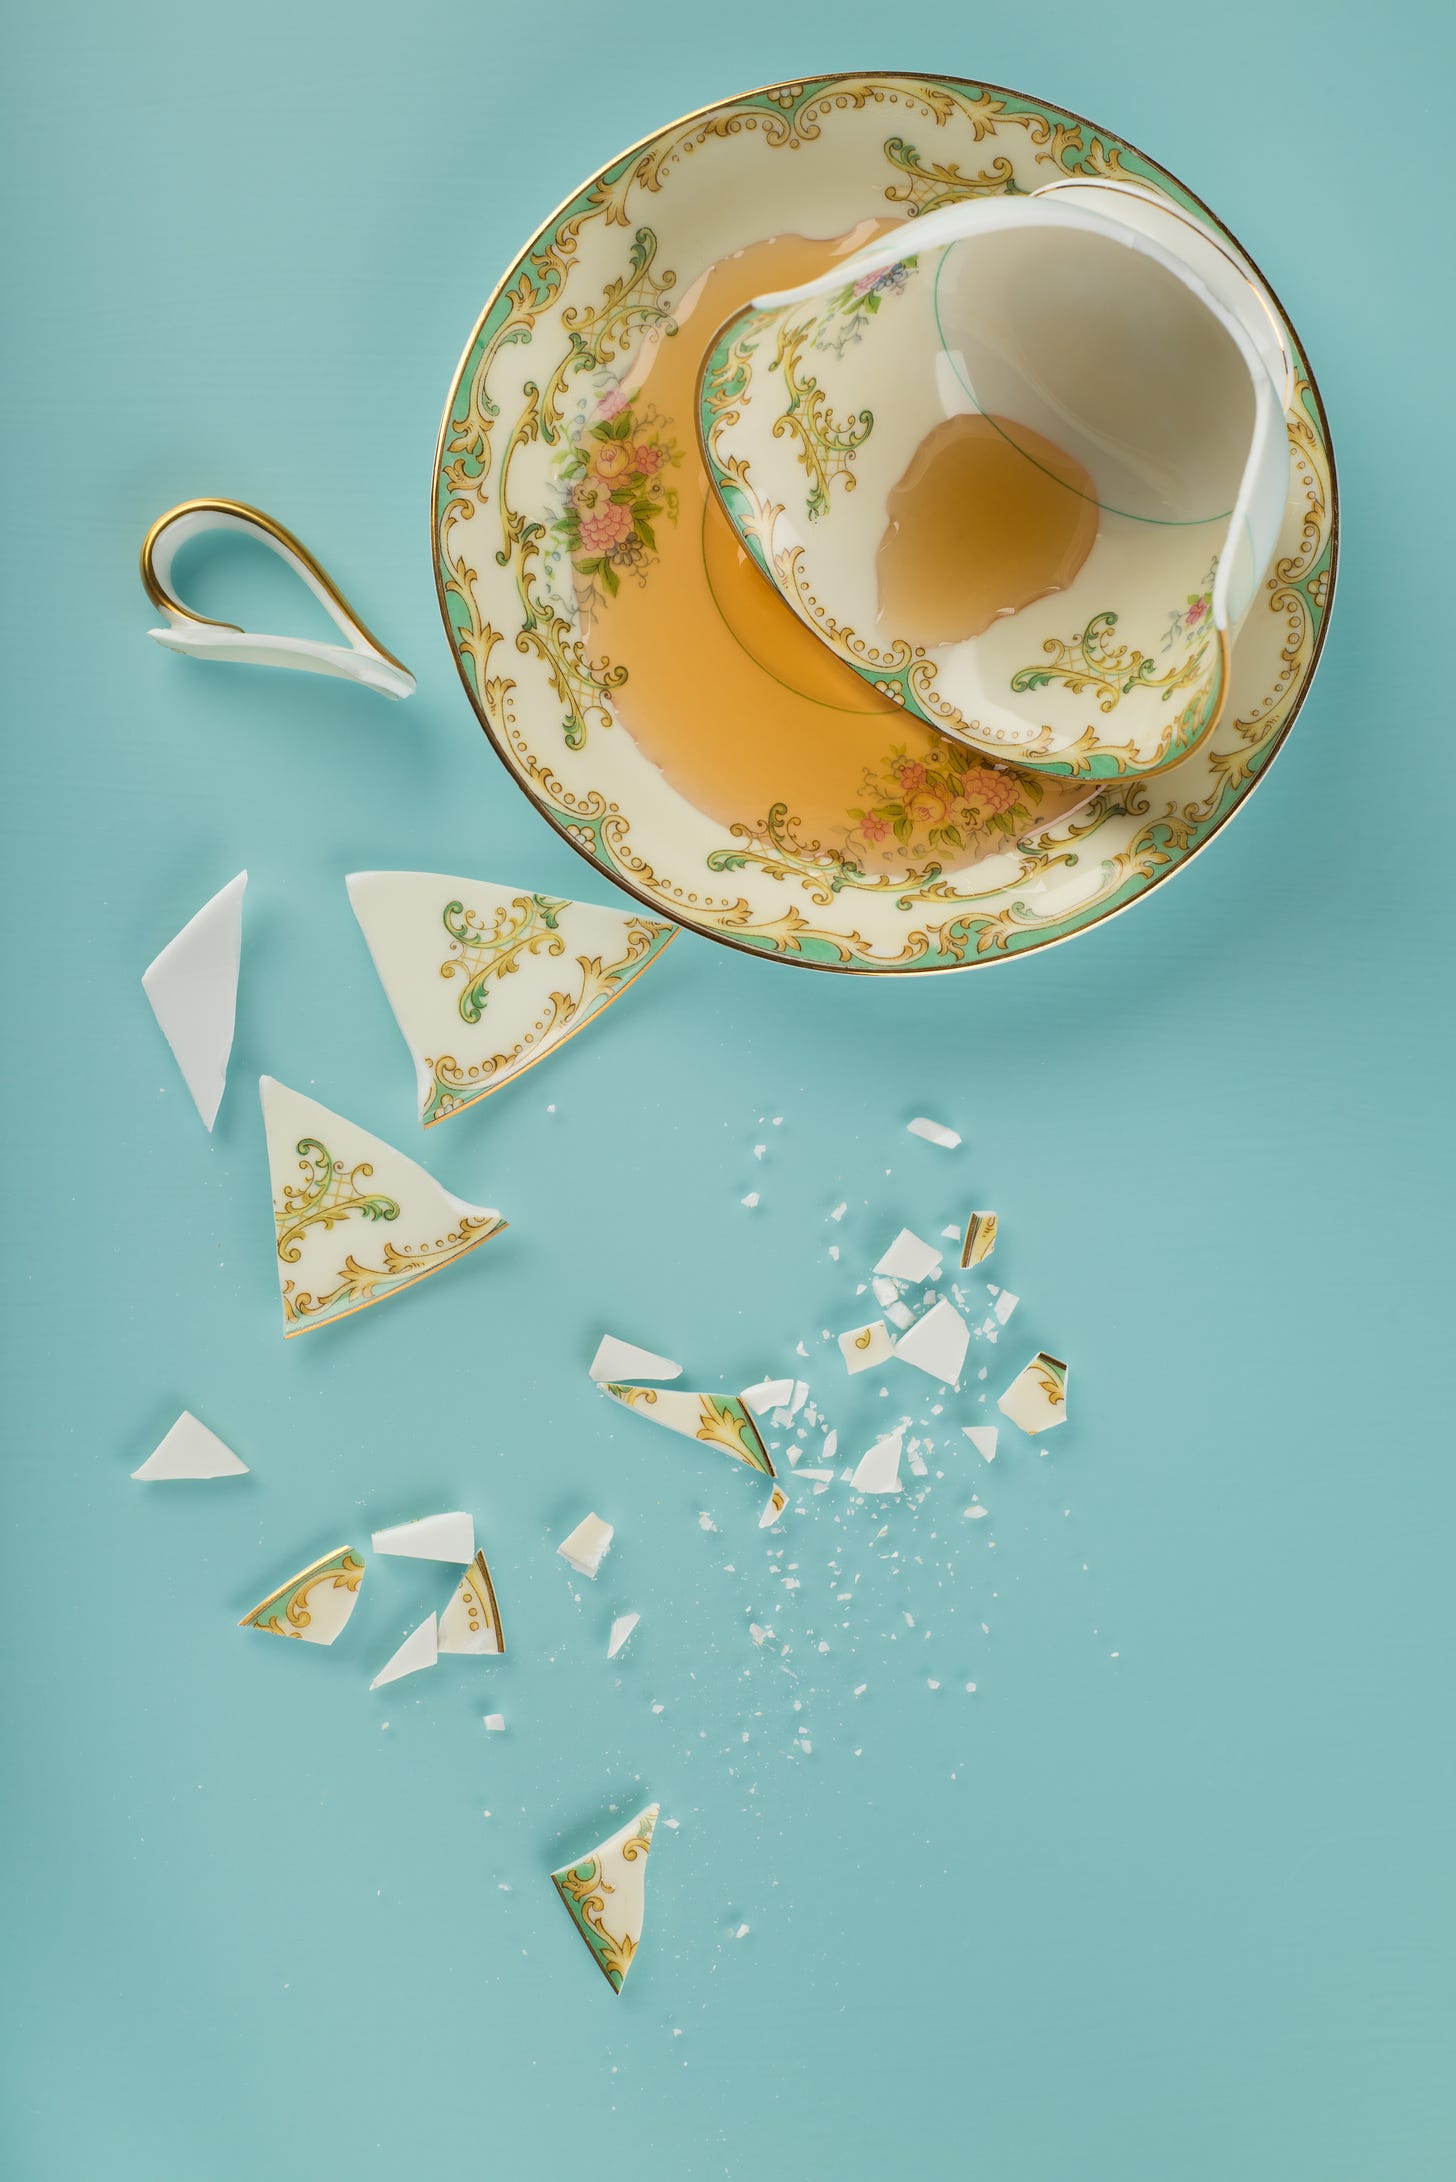 A dainty shattered teacup leaking tea onto the saucer